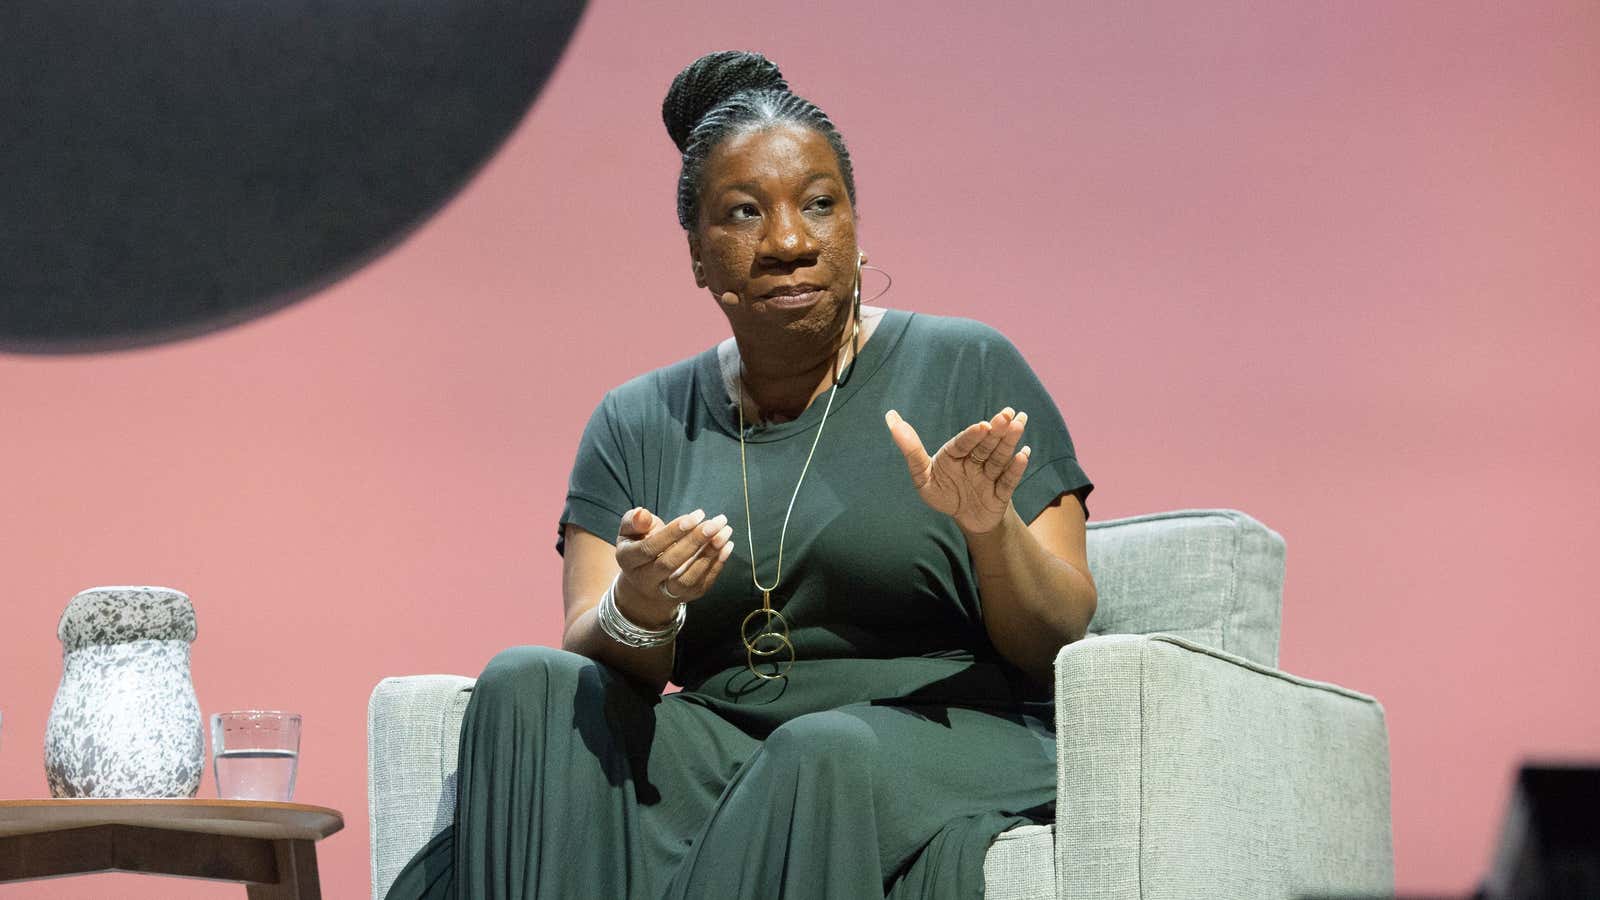 When people talk about Me Too, says Tarana Burke, she does not always recognize the movement she created.